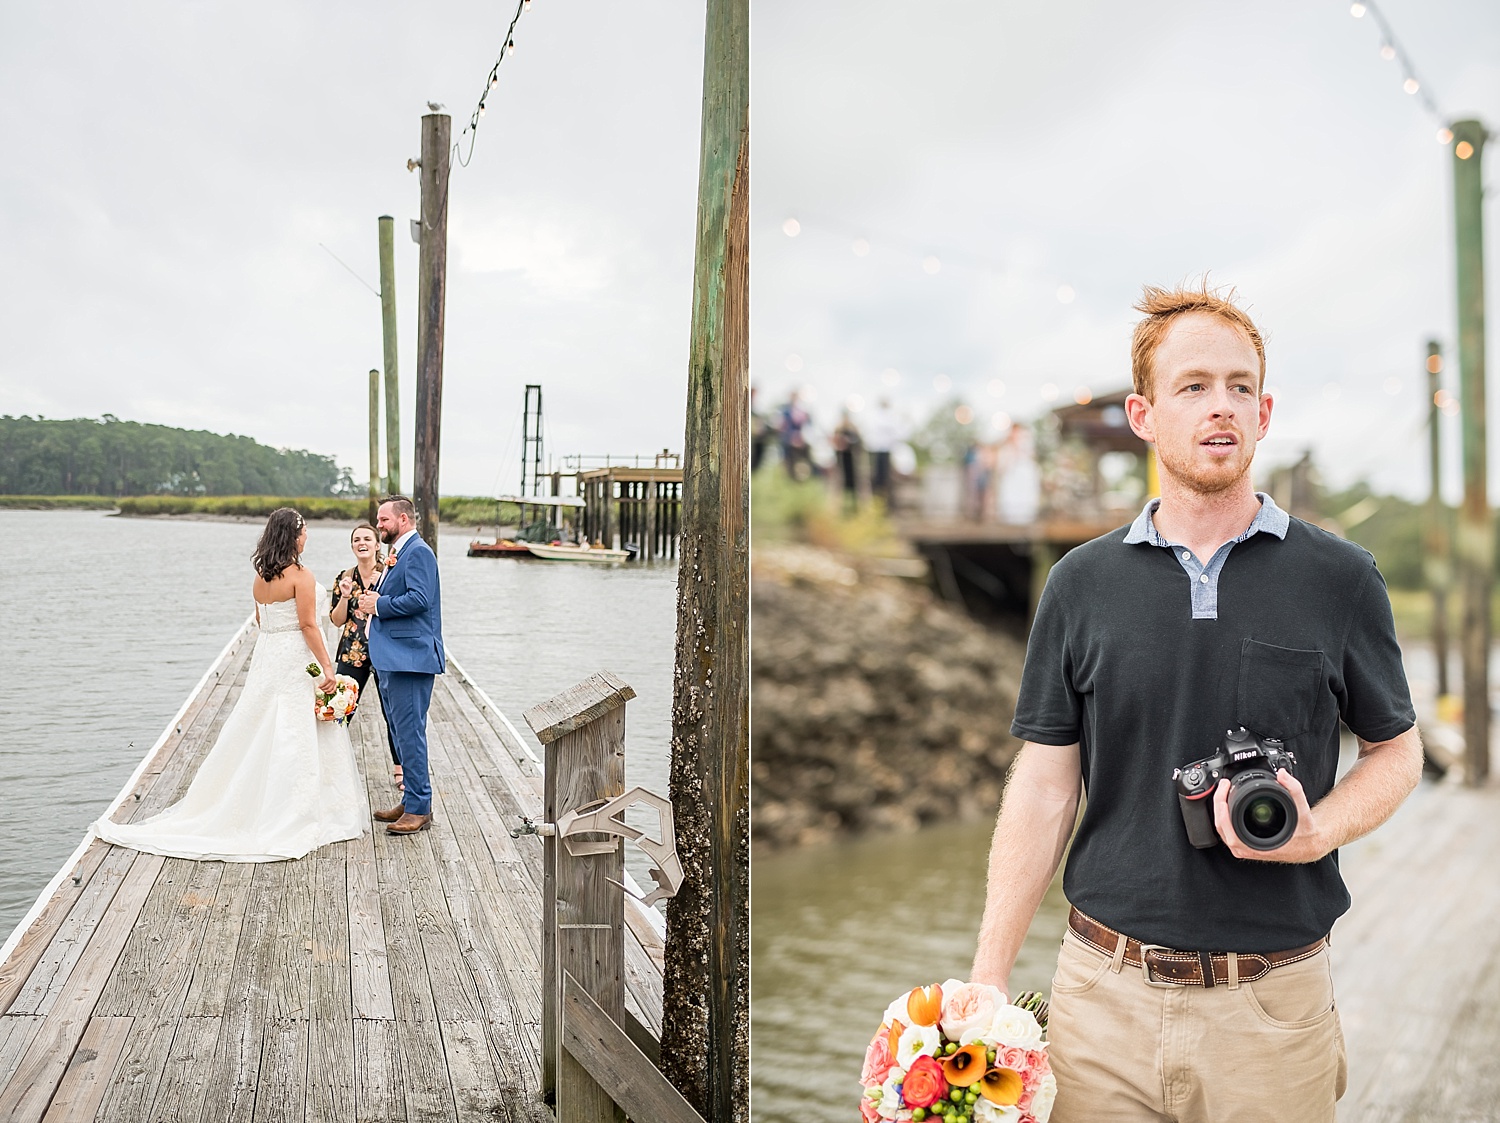  I'd love to return to Savannah for another wedding so if you know anyone looking for a photographer, we're there! 